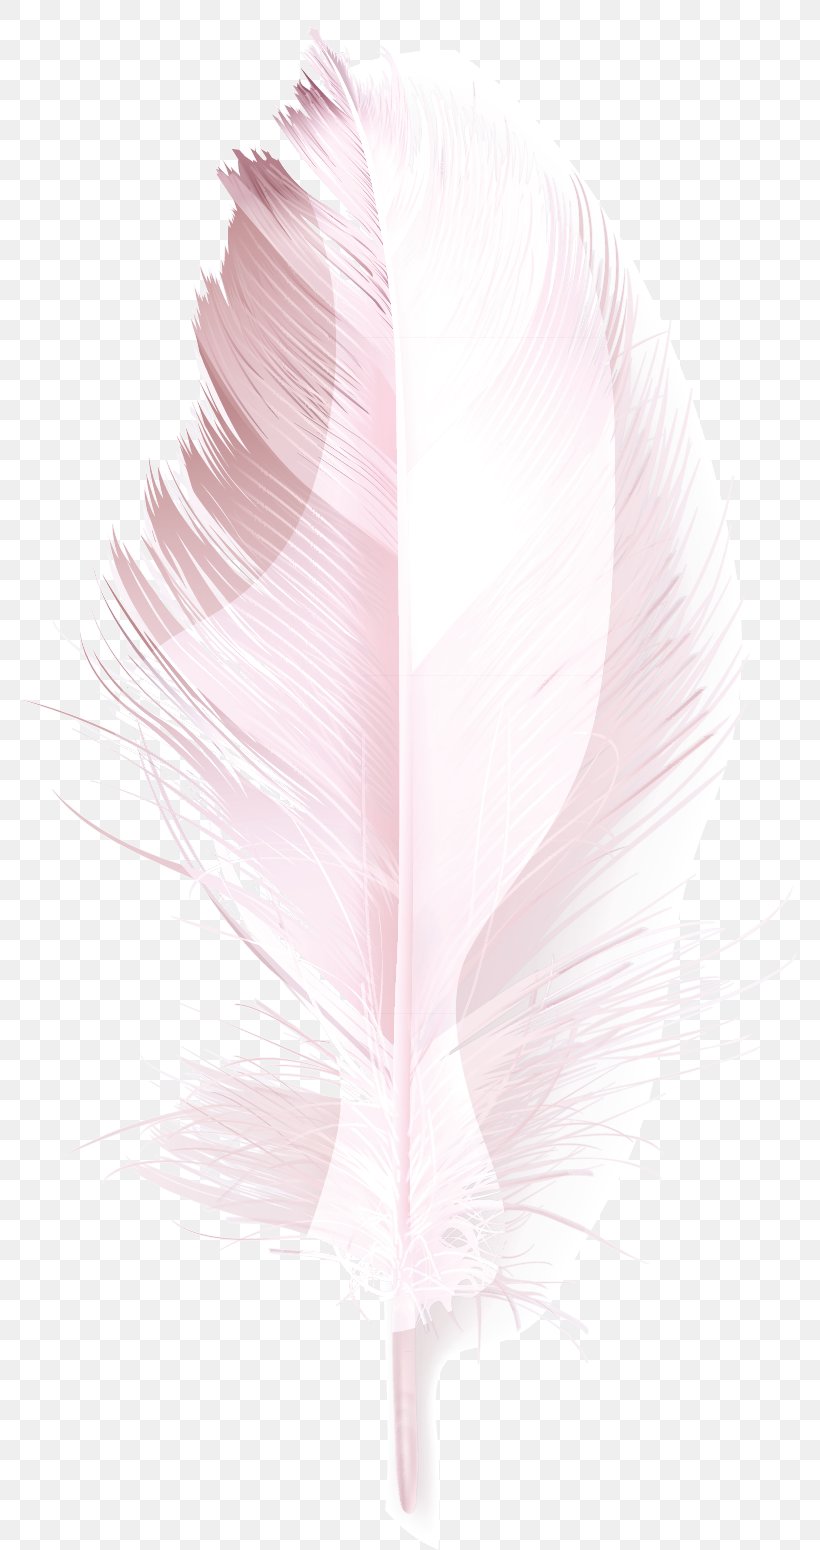 Feather, PNG, 774x1550px, Feather, Petal, Pink Download Free